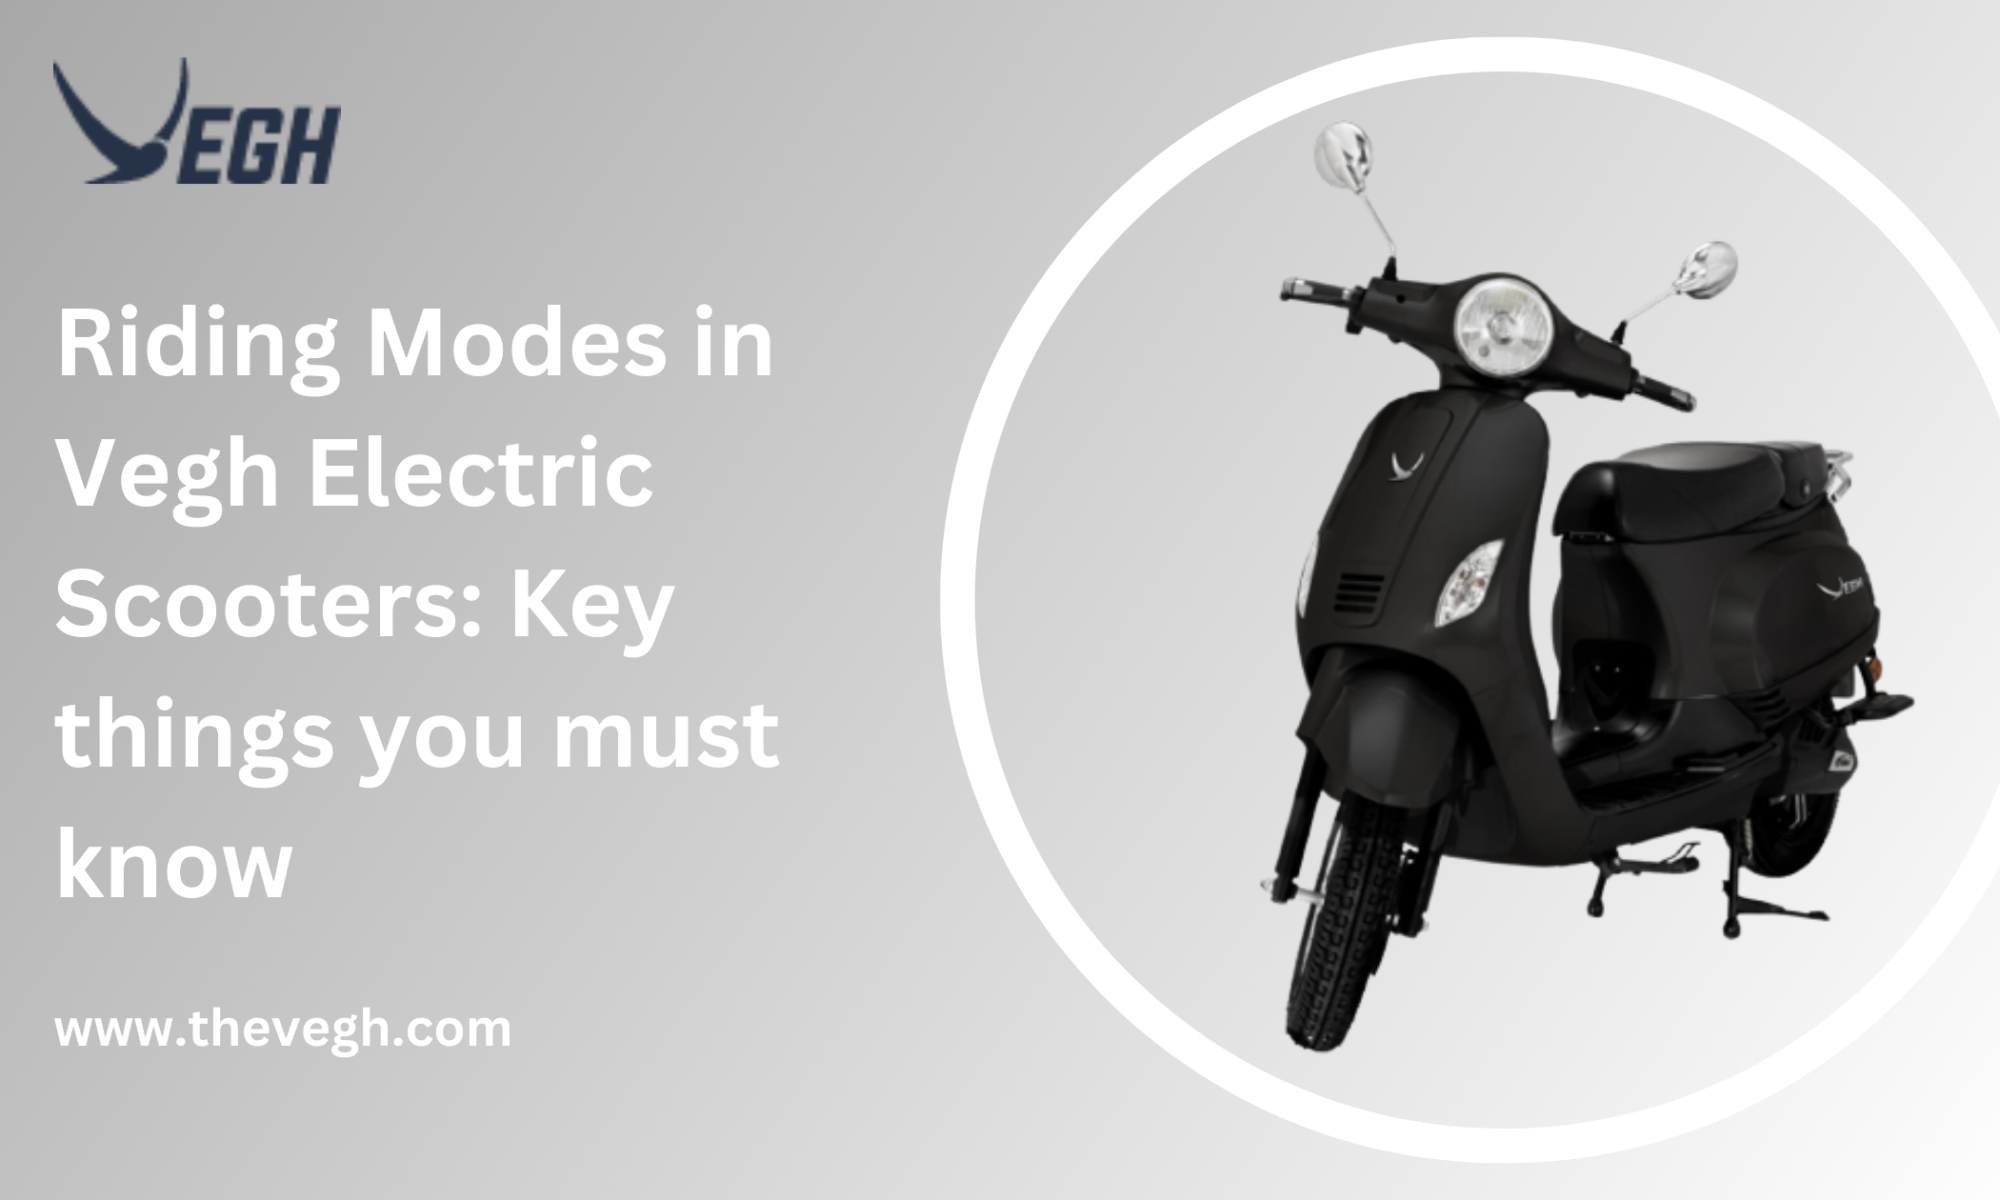 Riding Modes in Vegh Electric Scooters Key things you must know